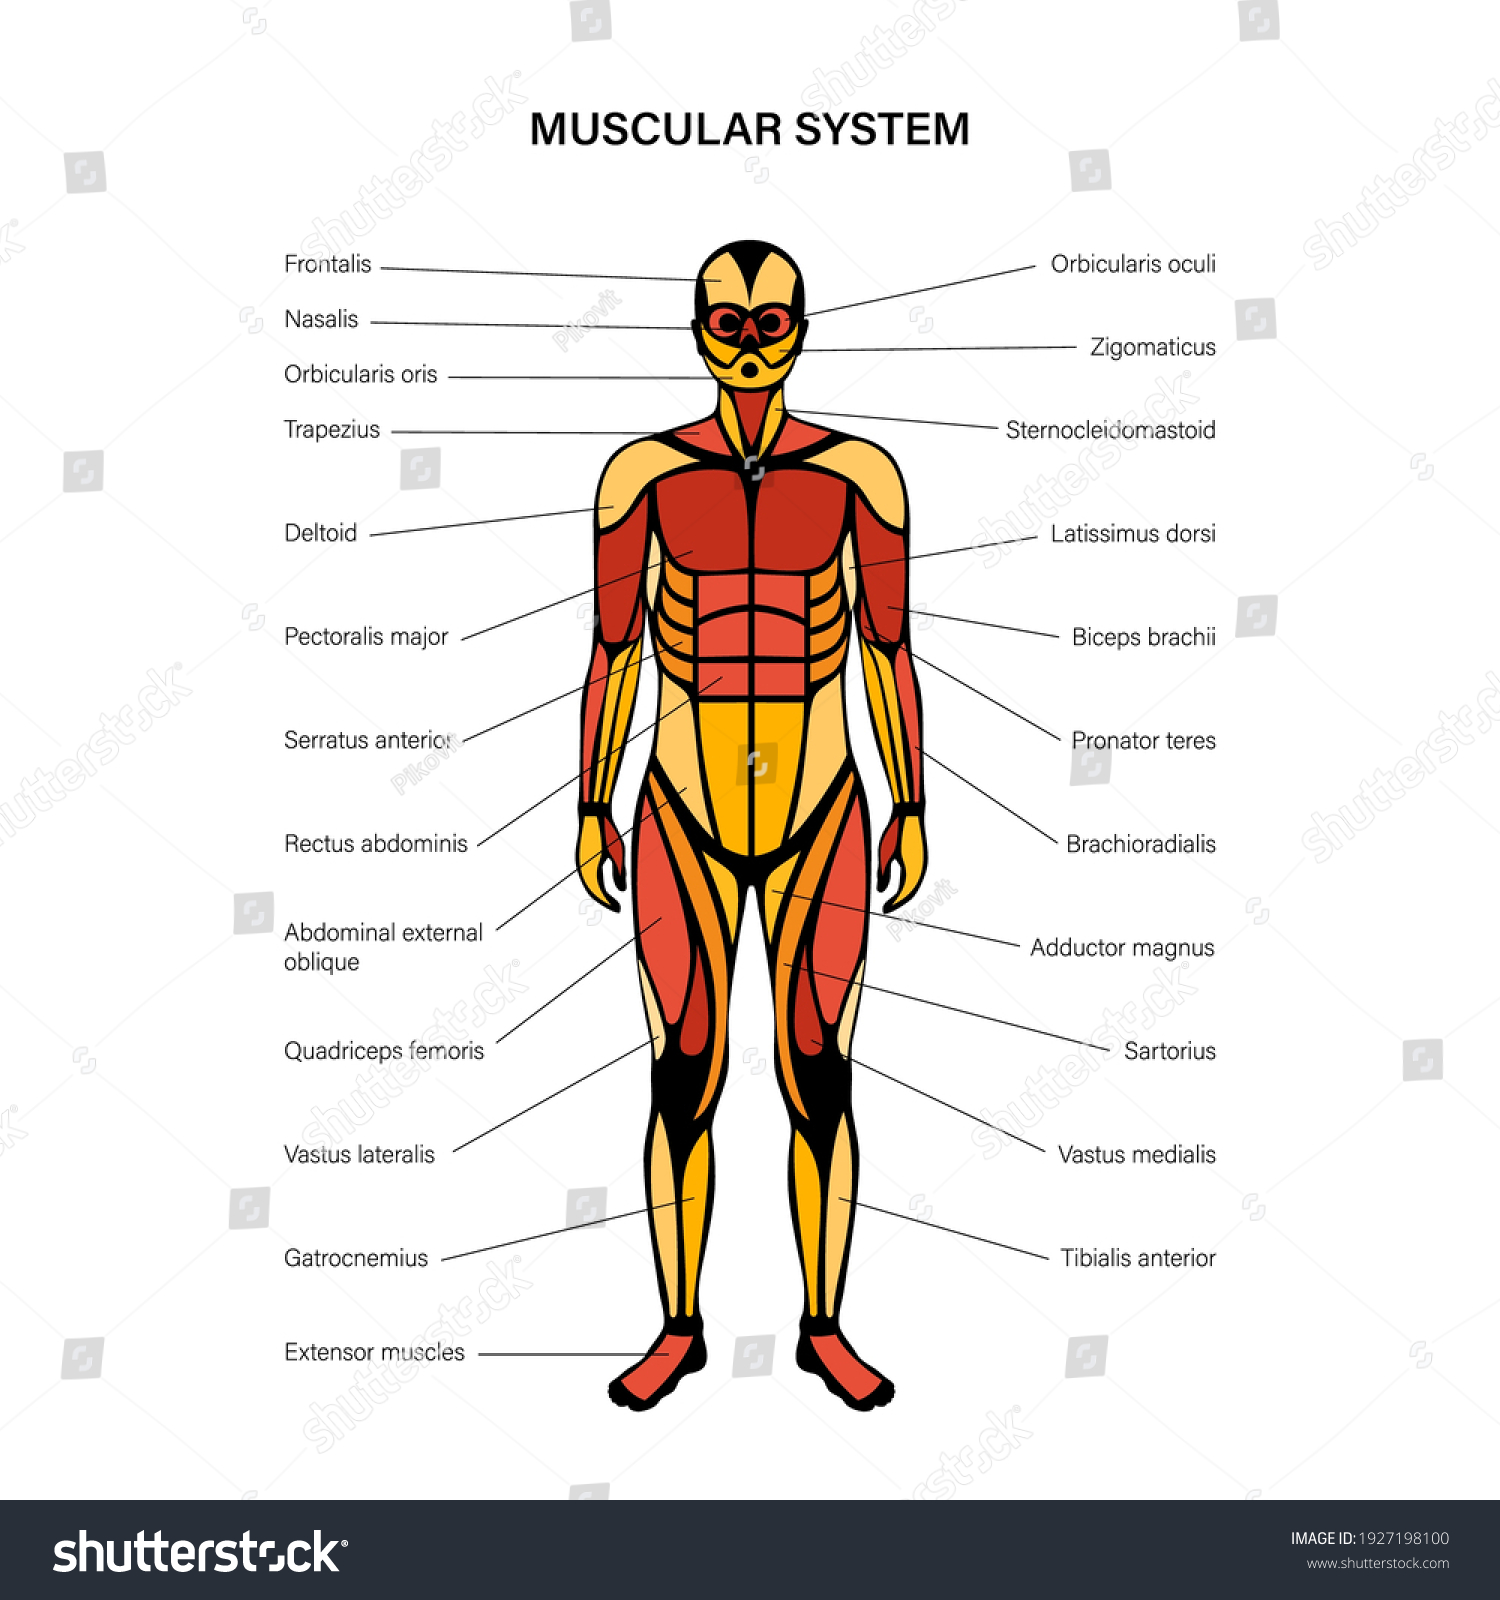 Human Muscular System Infographic Anatomical Poster Stock Vector ...